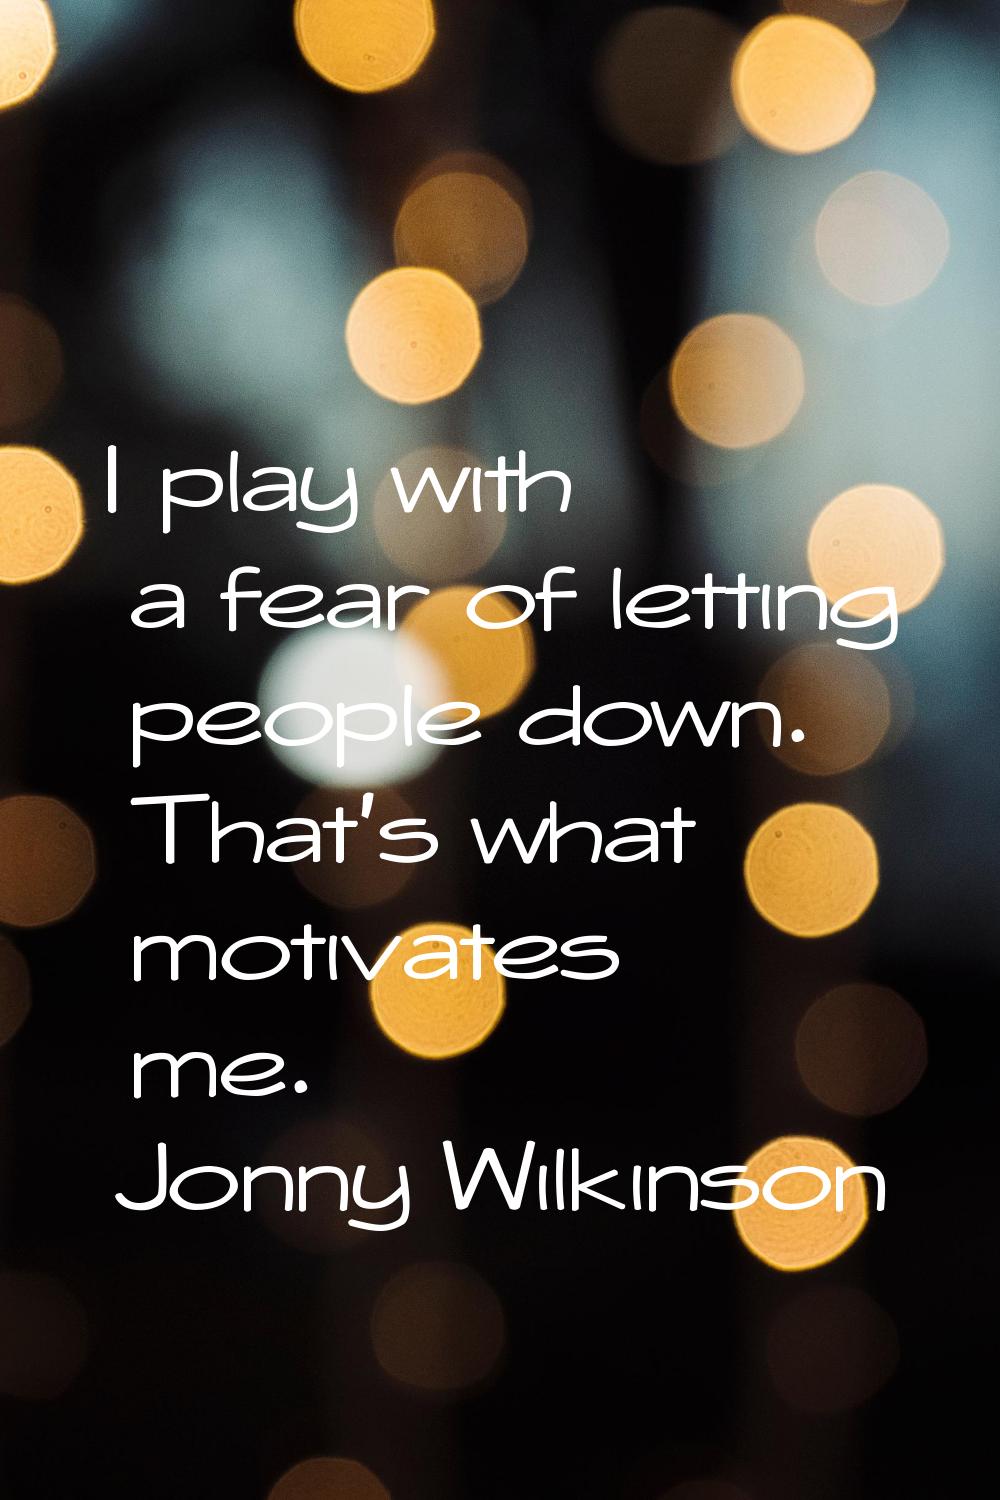 I play with a fear of letting people down. That's what motivates me.